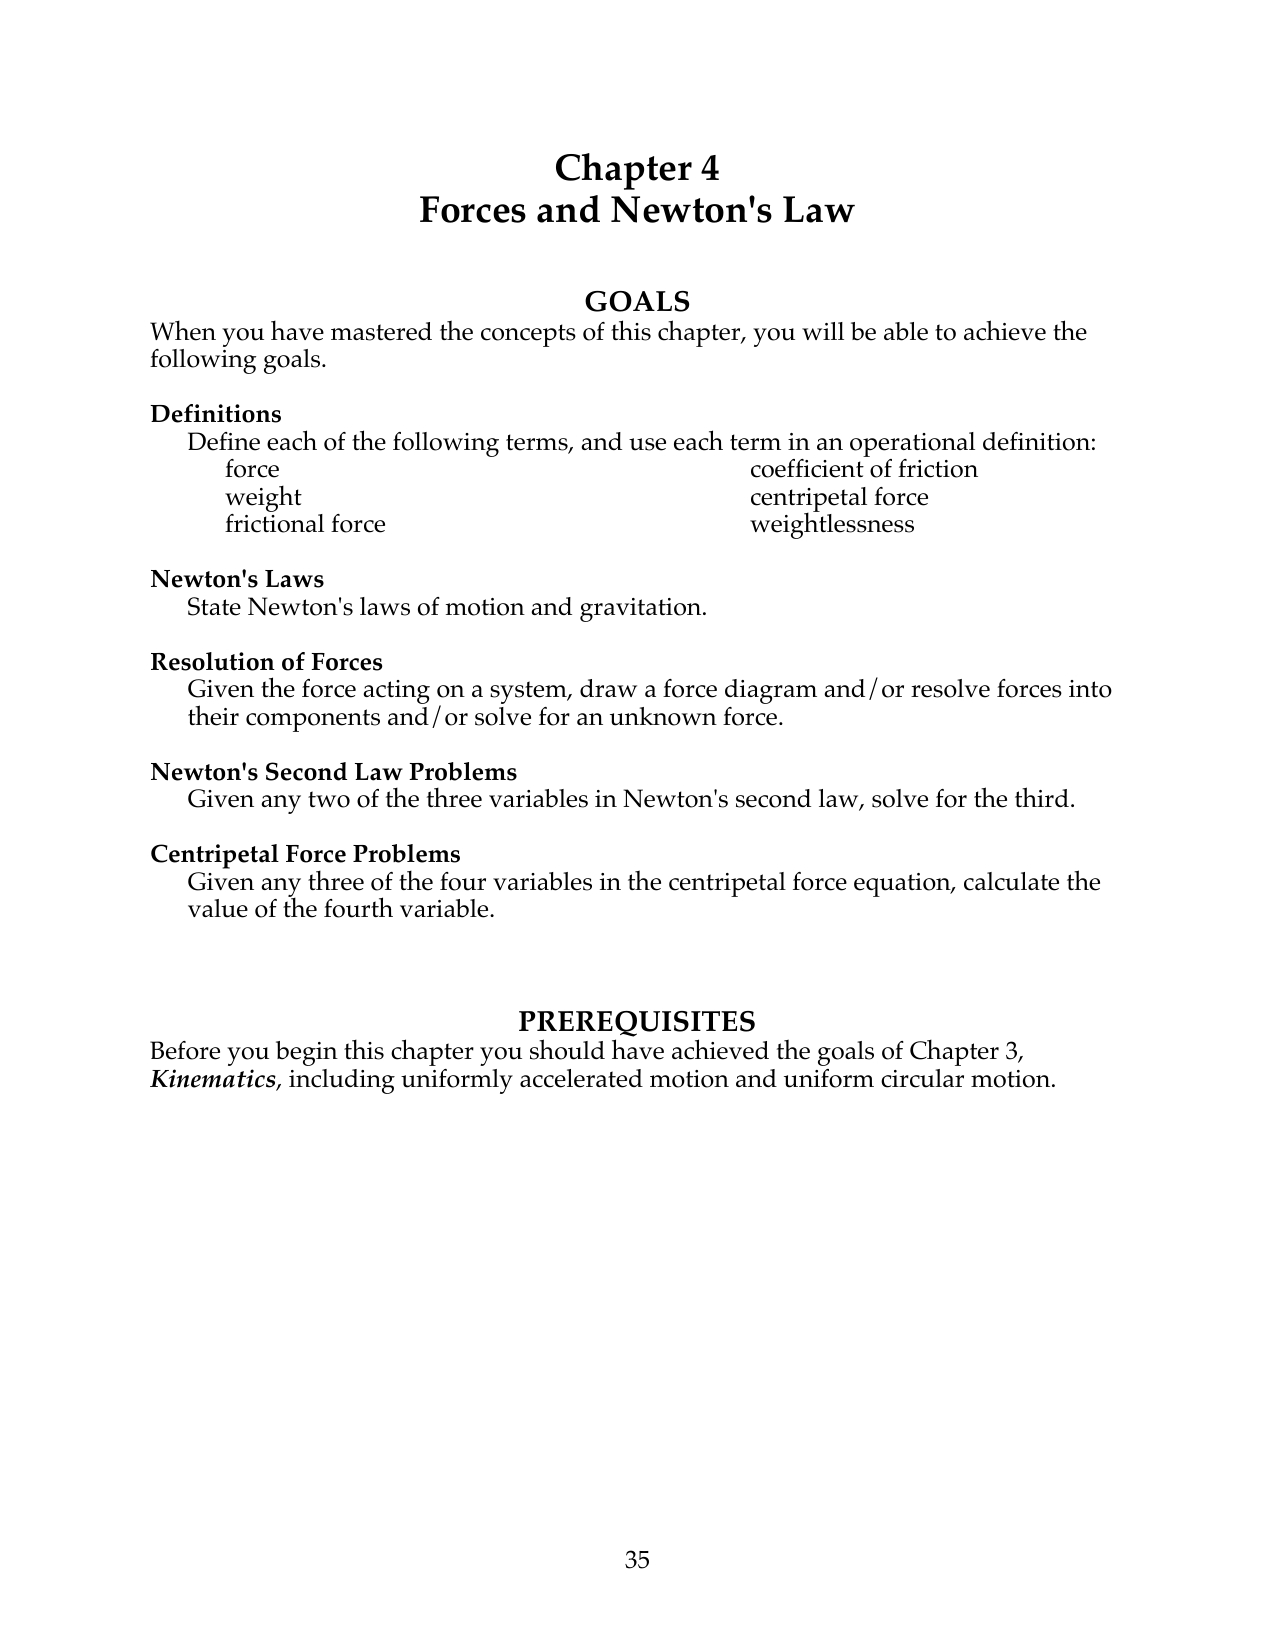 Free Body Diagram Definition Chapter 4 Forces And Newtons Law